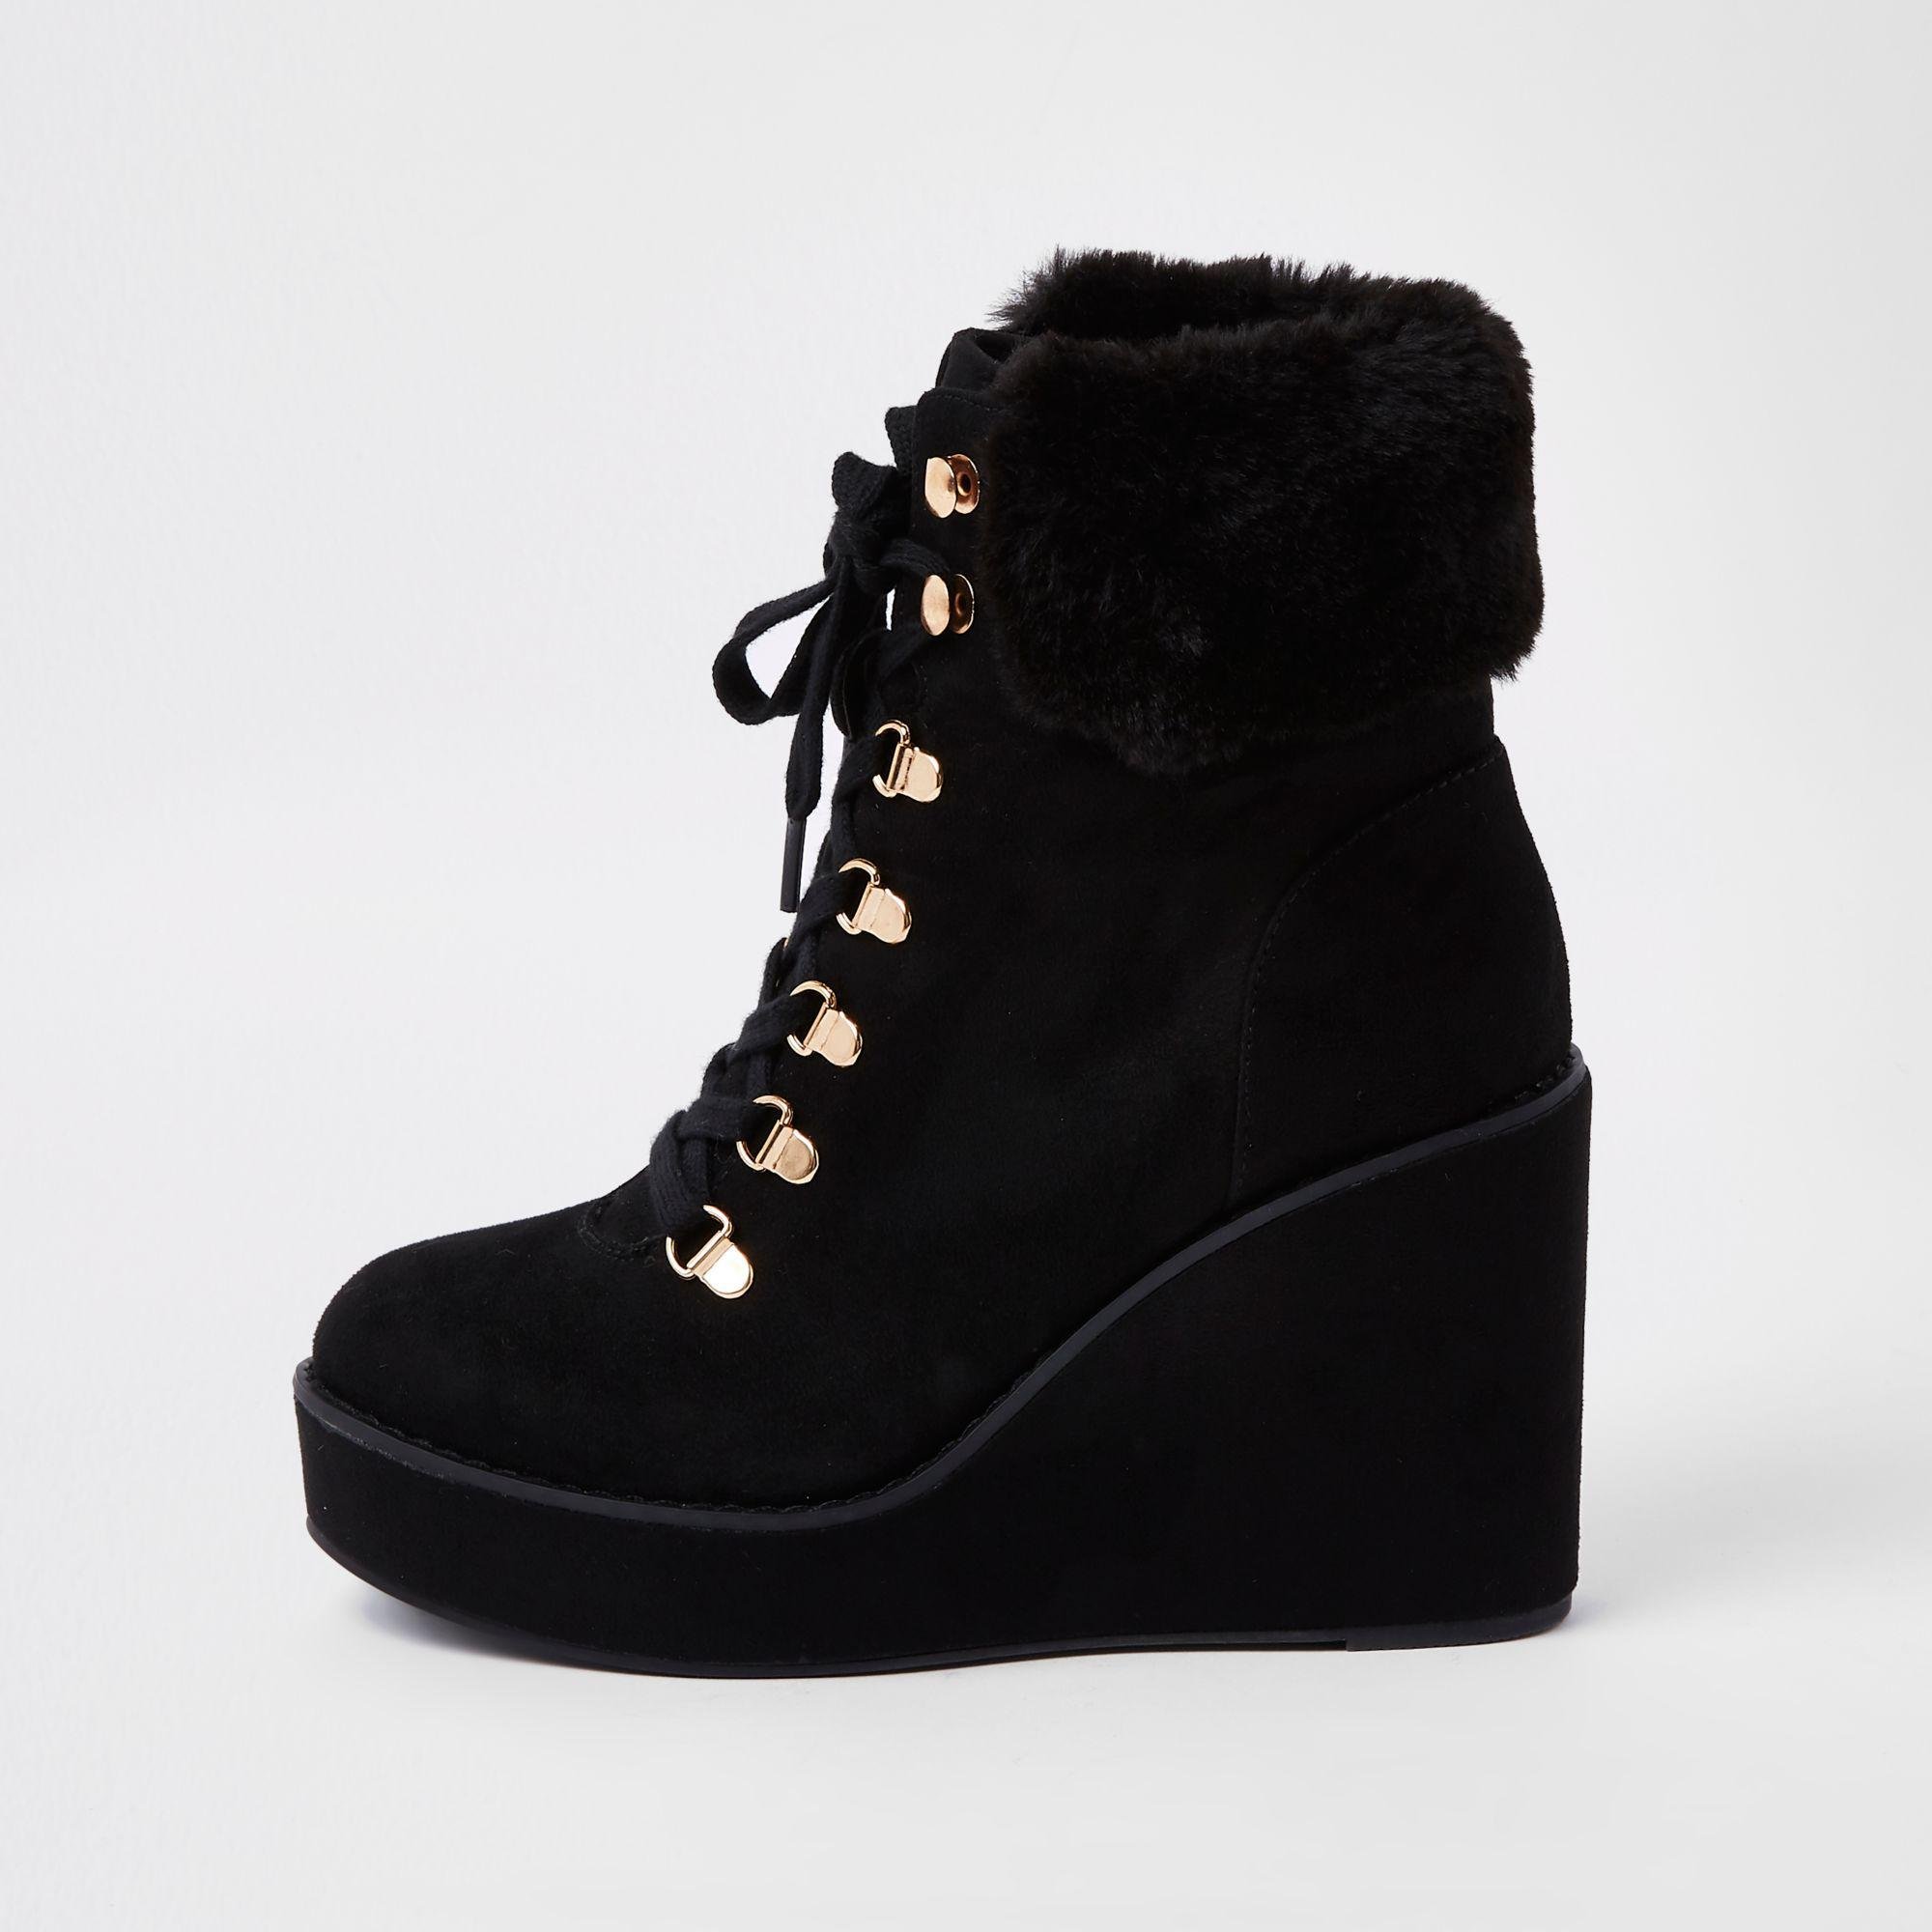 Lace-up Wedge Heel Boots - Lyst